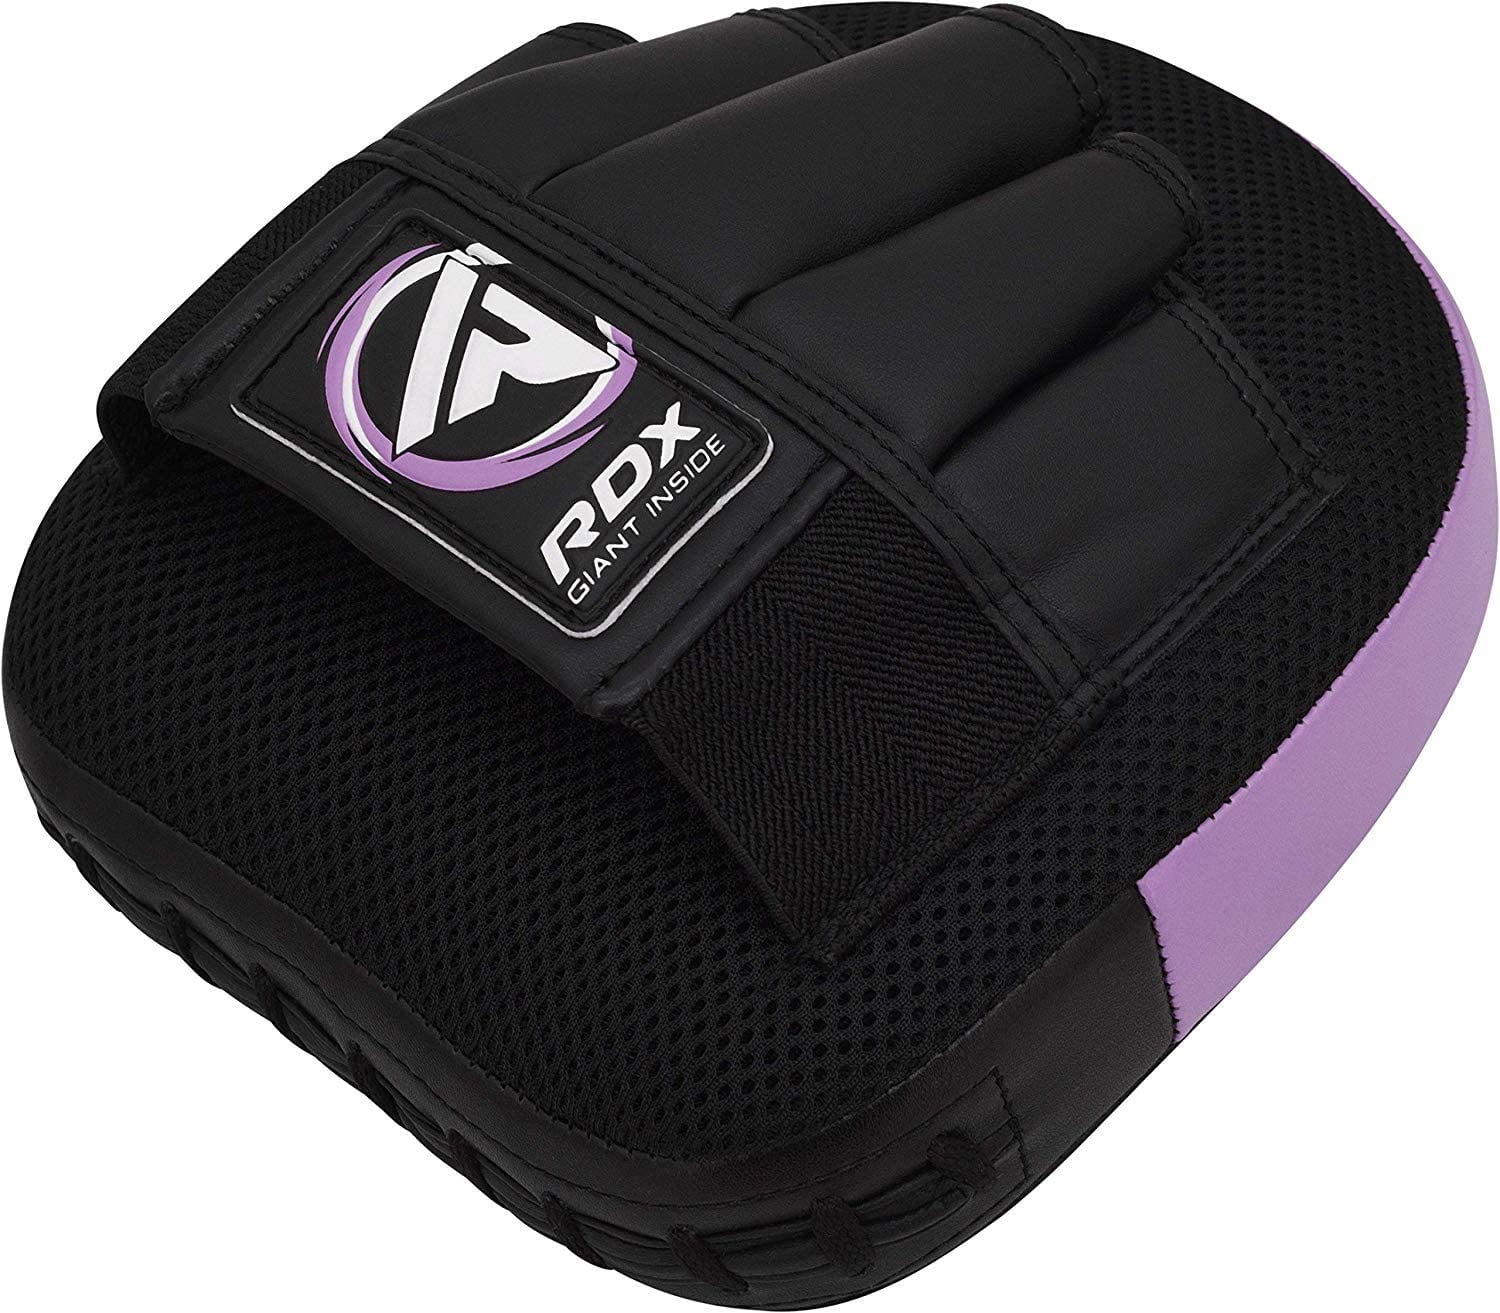 Details about   SOO Kids Boxing Pads Focus Mitts Hook & Jab Target Hand Pads Muay Thai Karate 